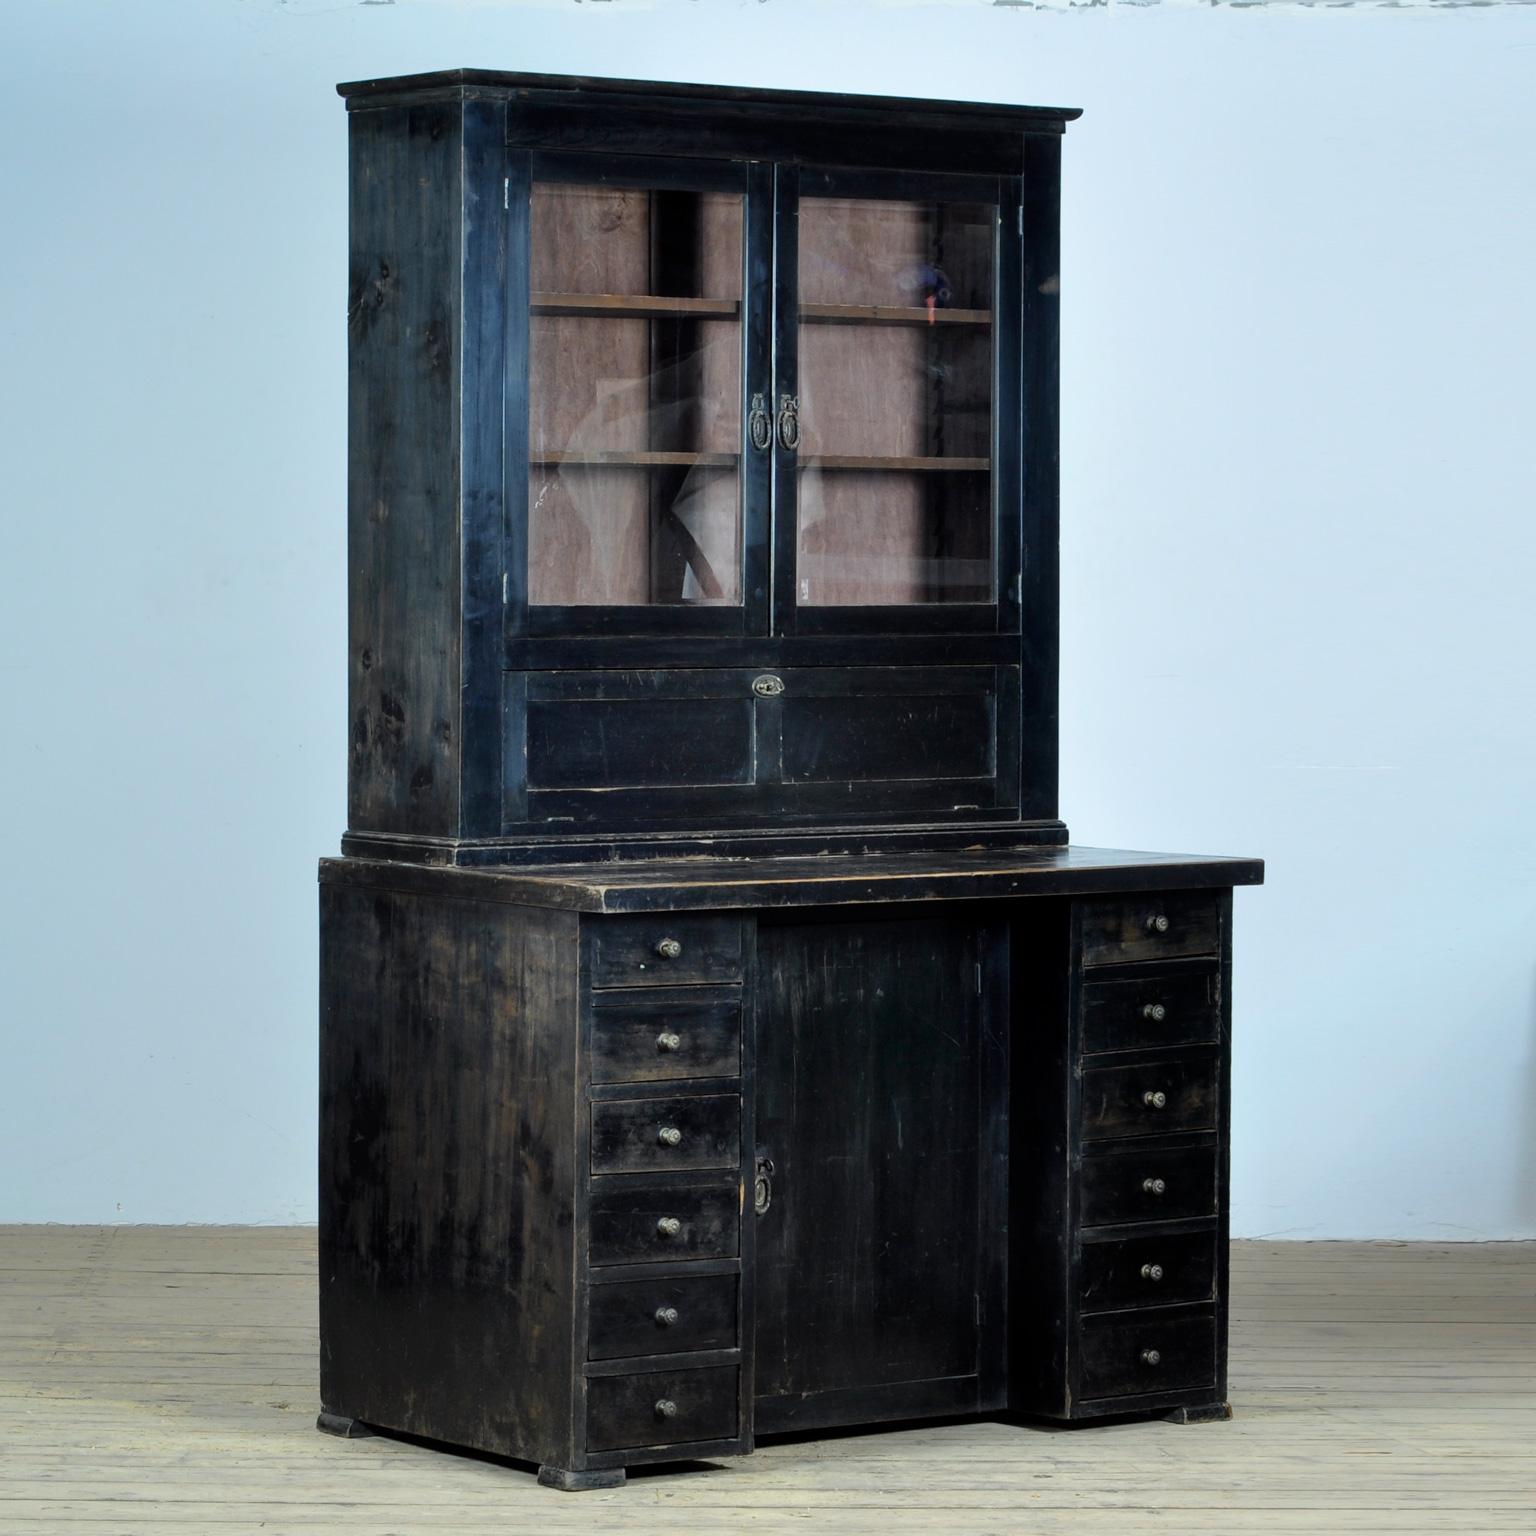 This cabinet dates from circa 1920, produced in Germany. With 12 drawers and a door with a shelf behind it in the lower part. In the upper part a display case and a flap. The cabinet consists of two separate parts.